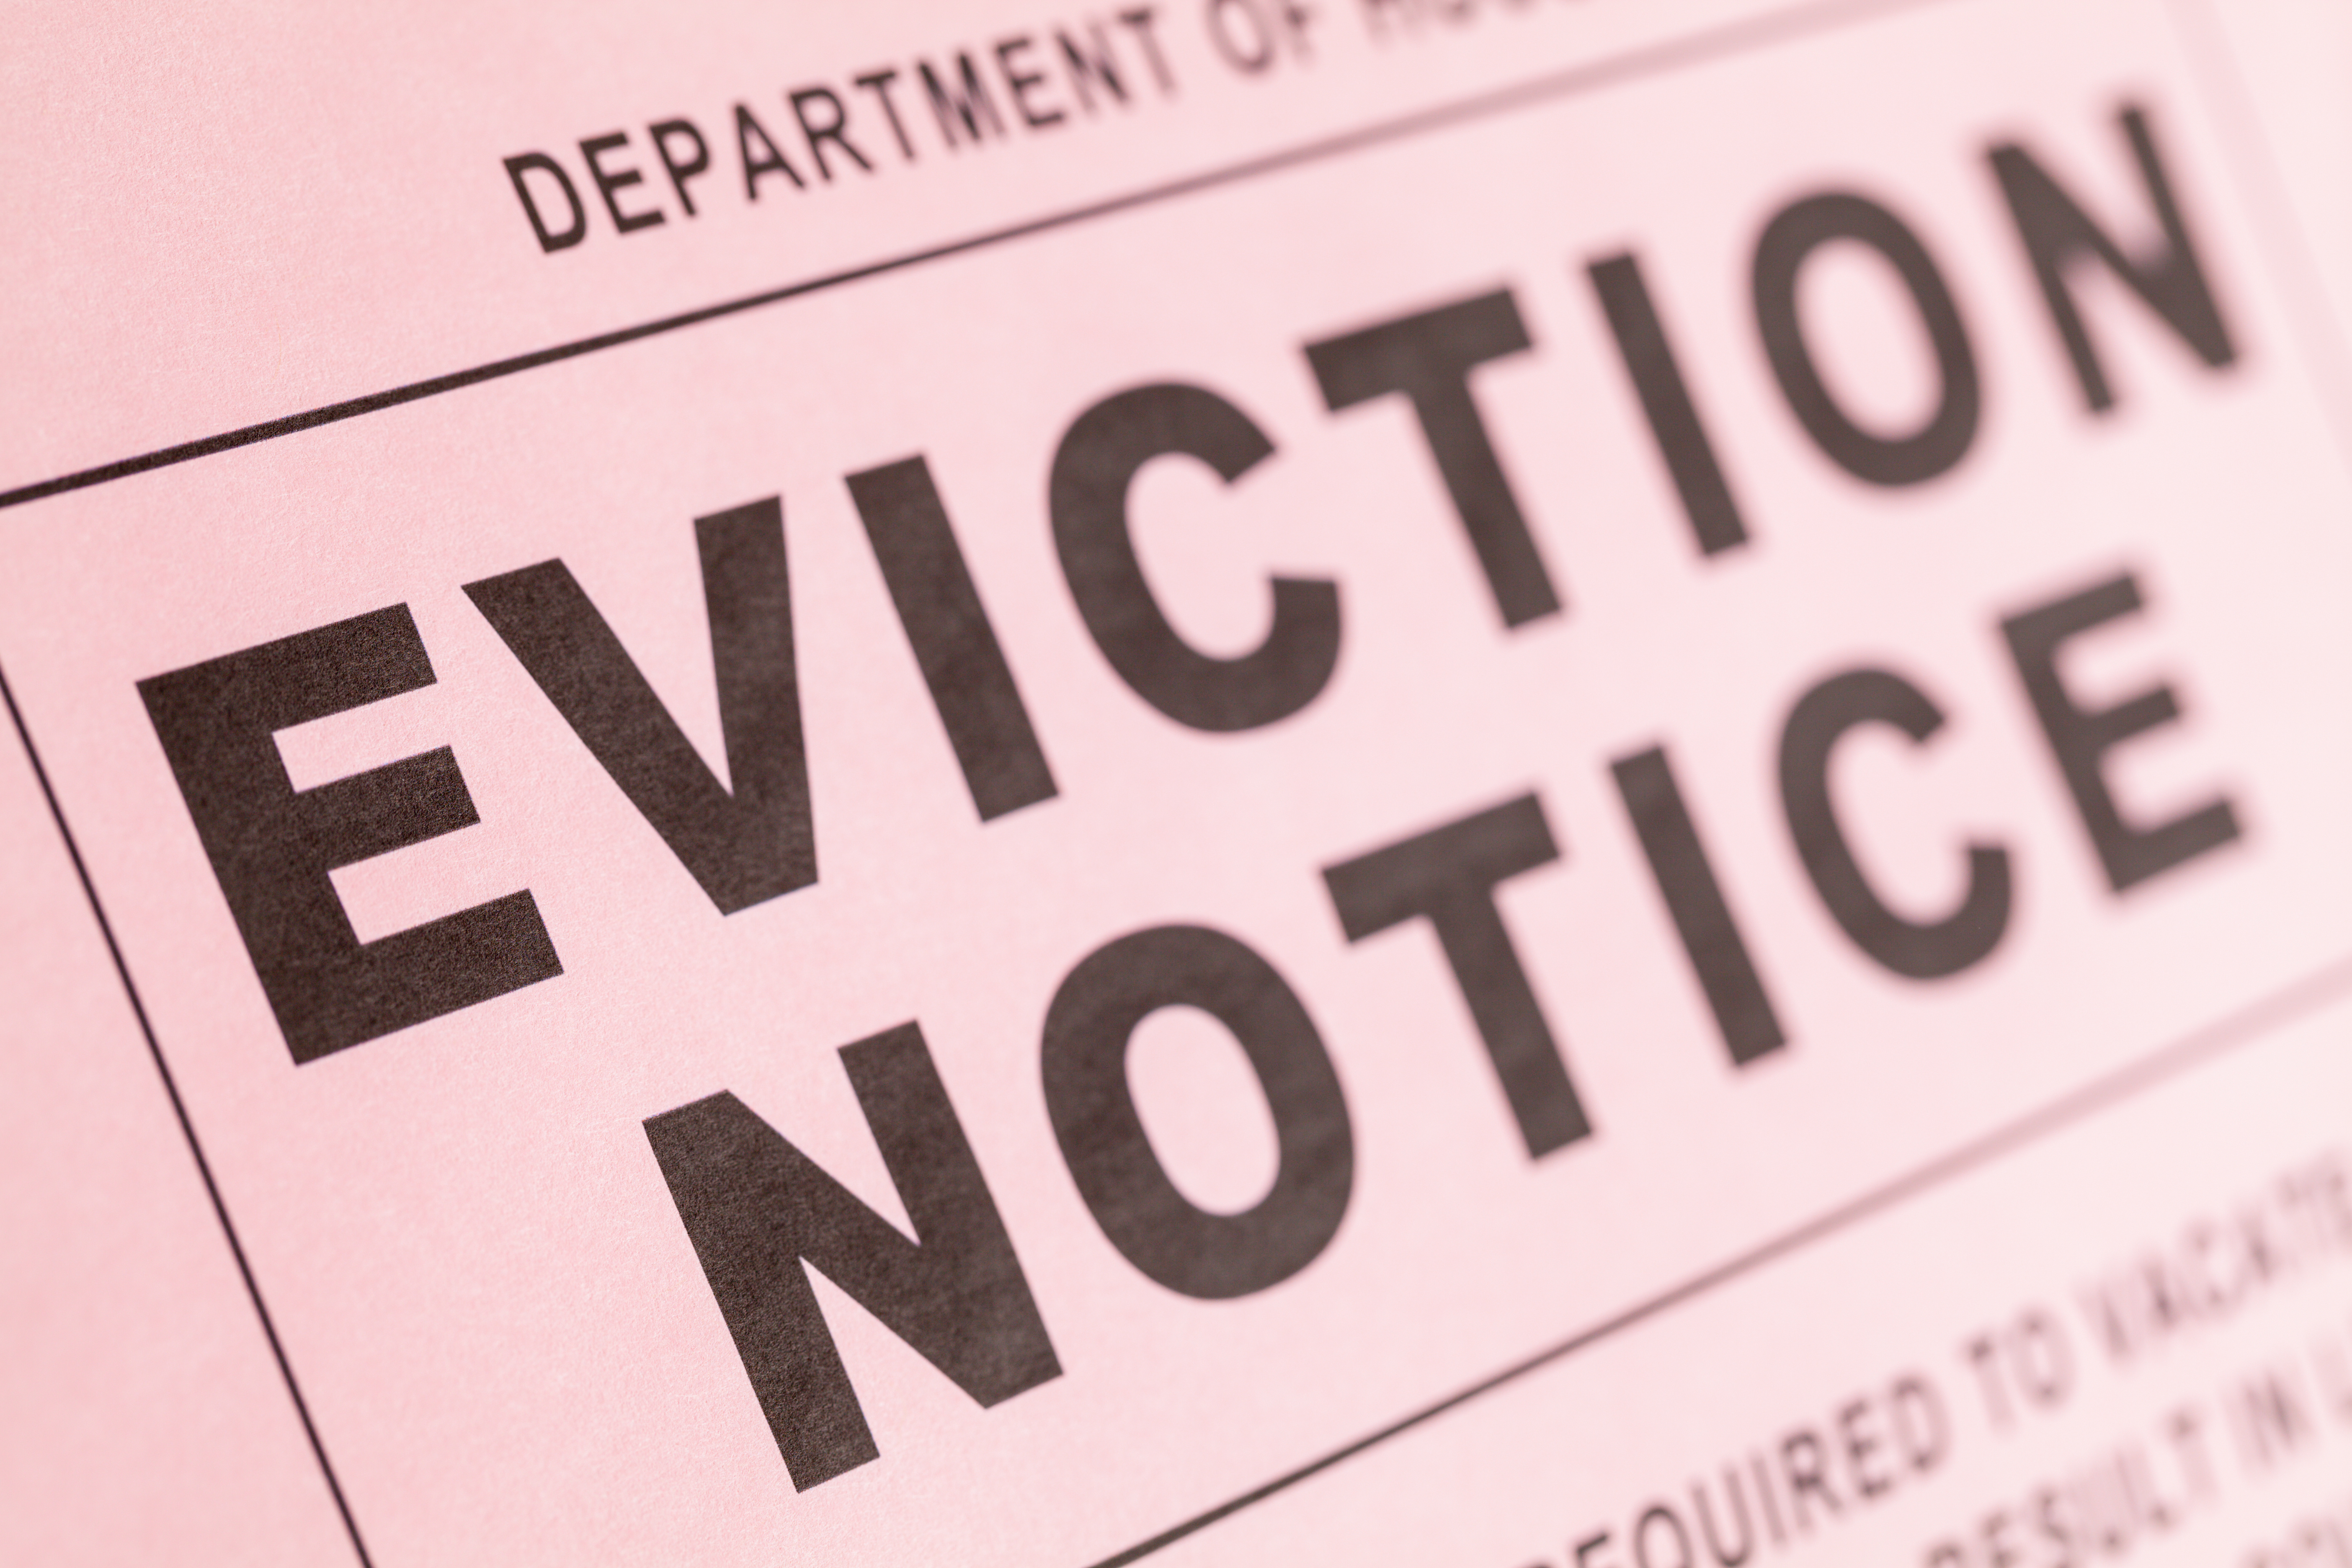 Is it easier to evict for Non-Payment or Non-Monetary Violations